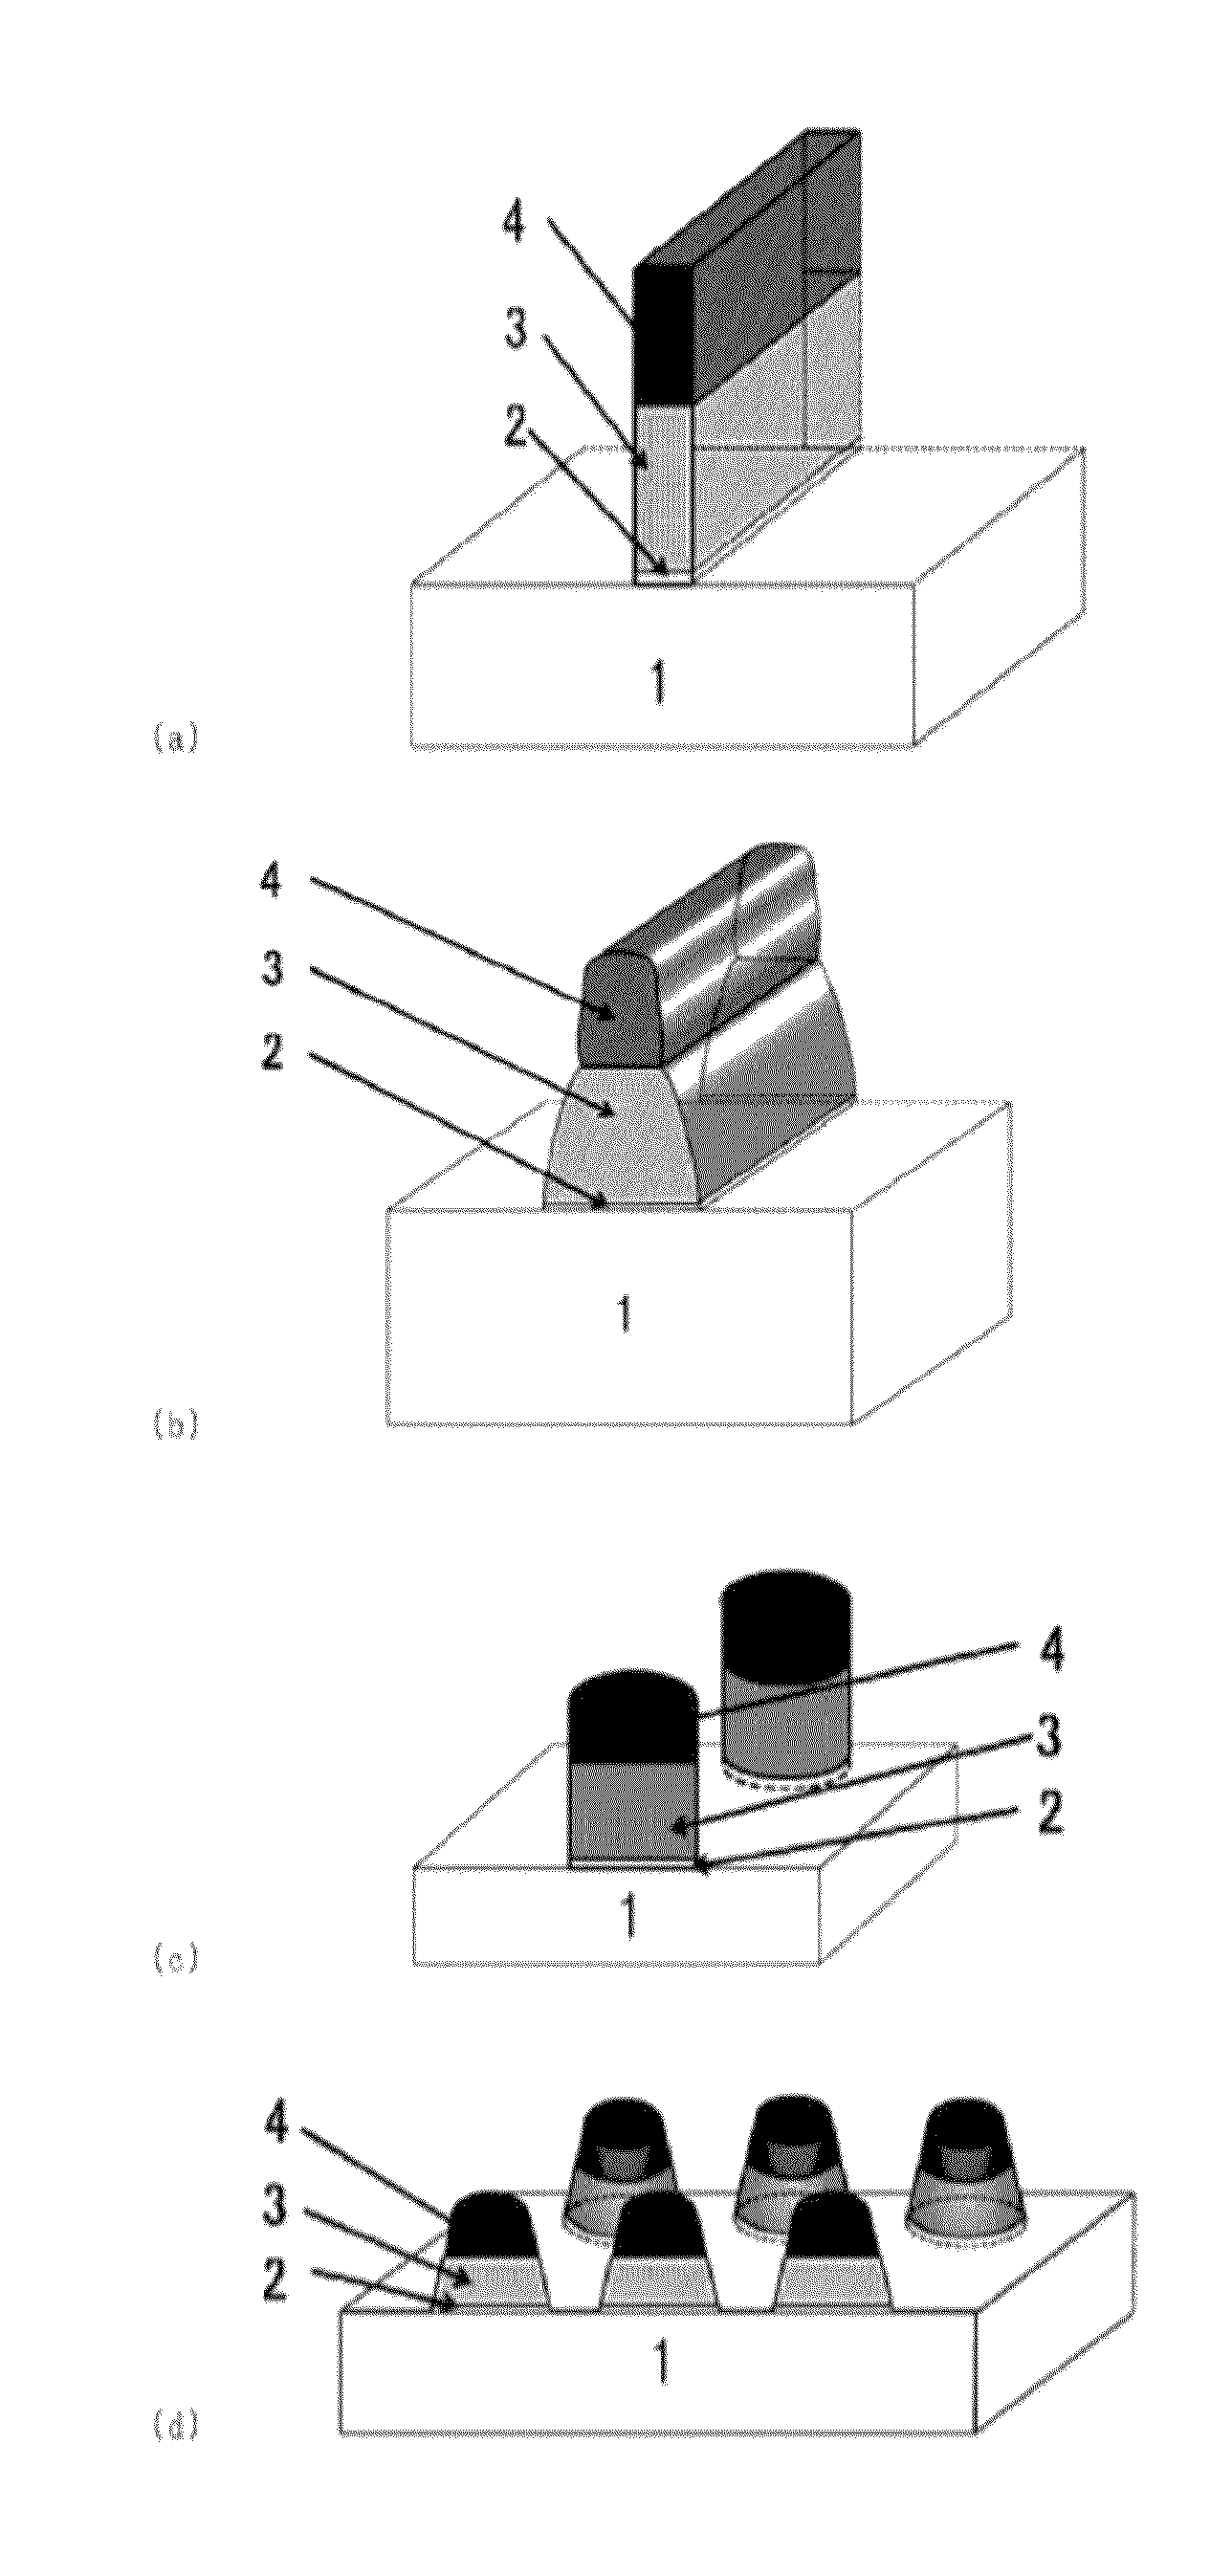 Ferroelectric device and meethod for manufacturing same